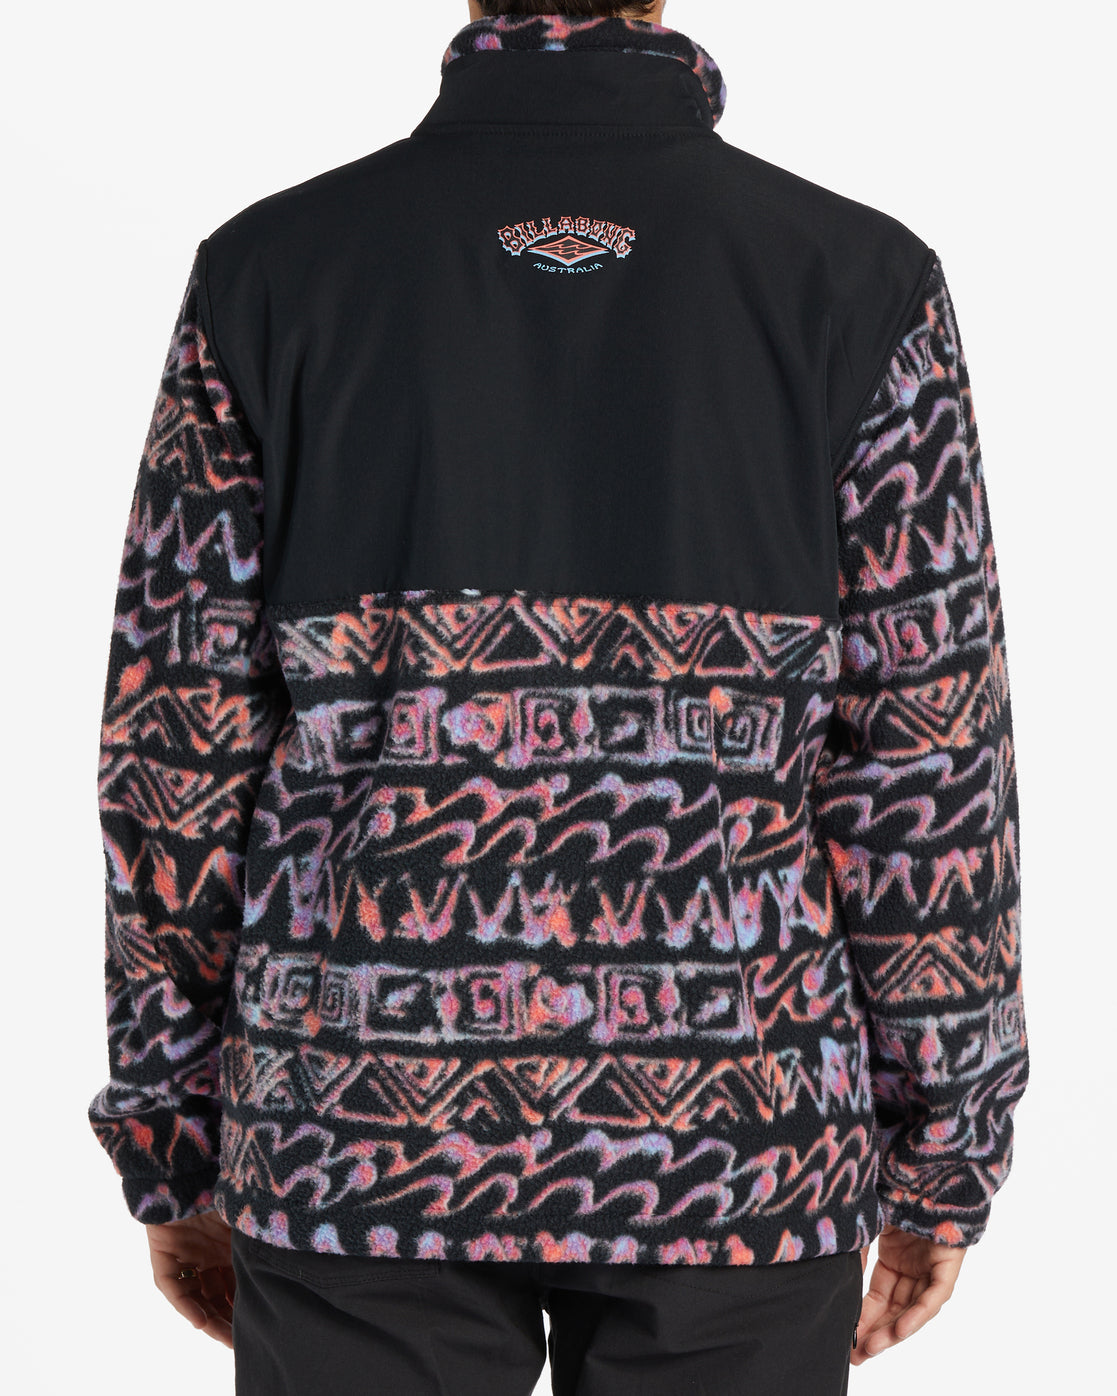 Billabong Boundary Re-Issue Crew Fleece in black and multi coloured from back